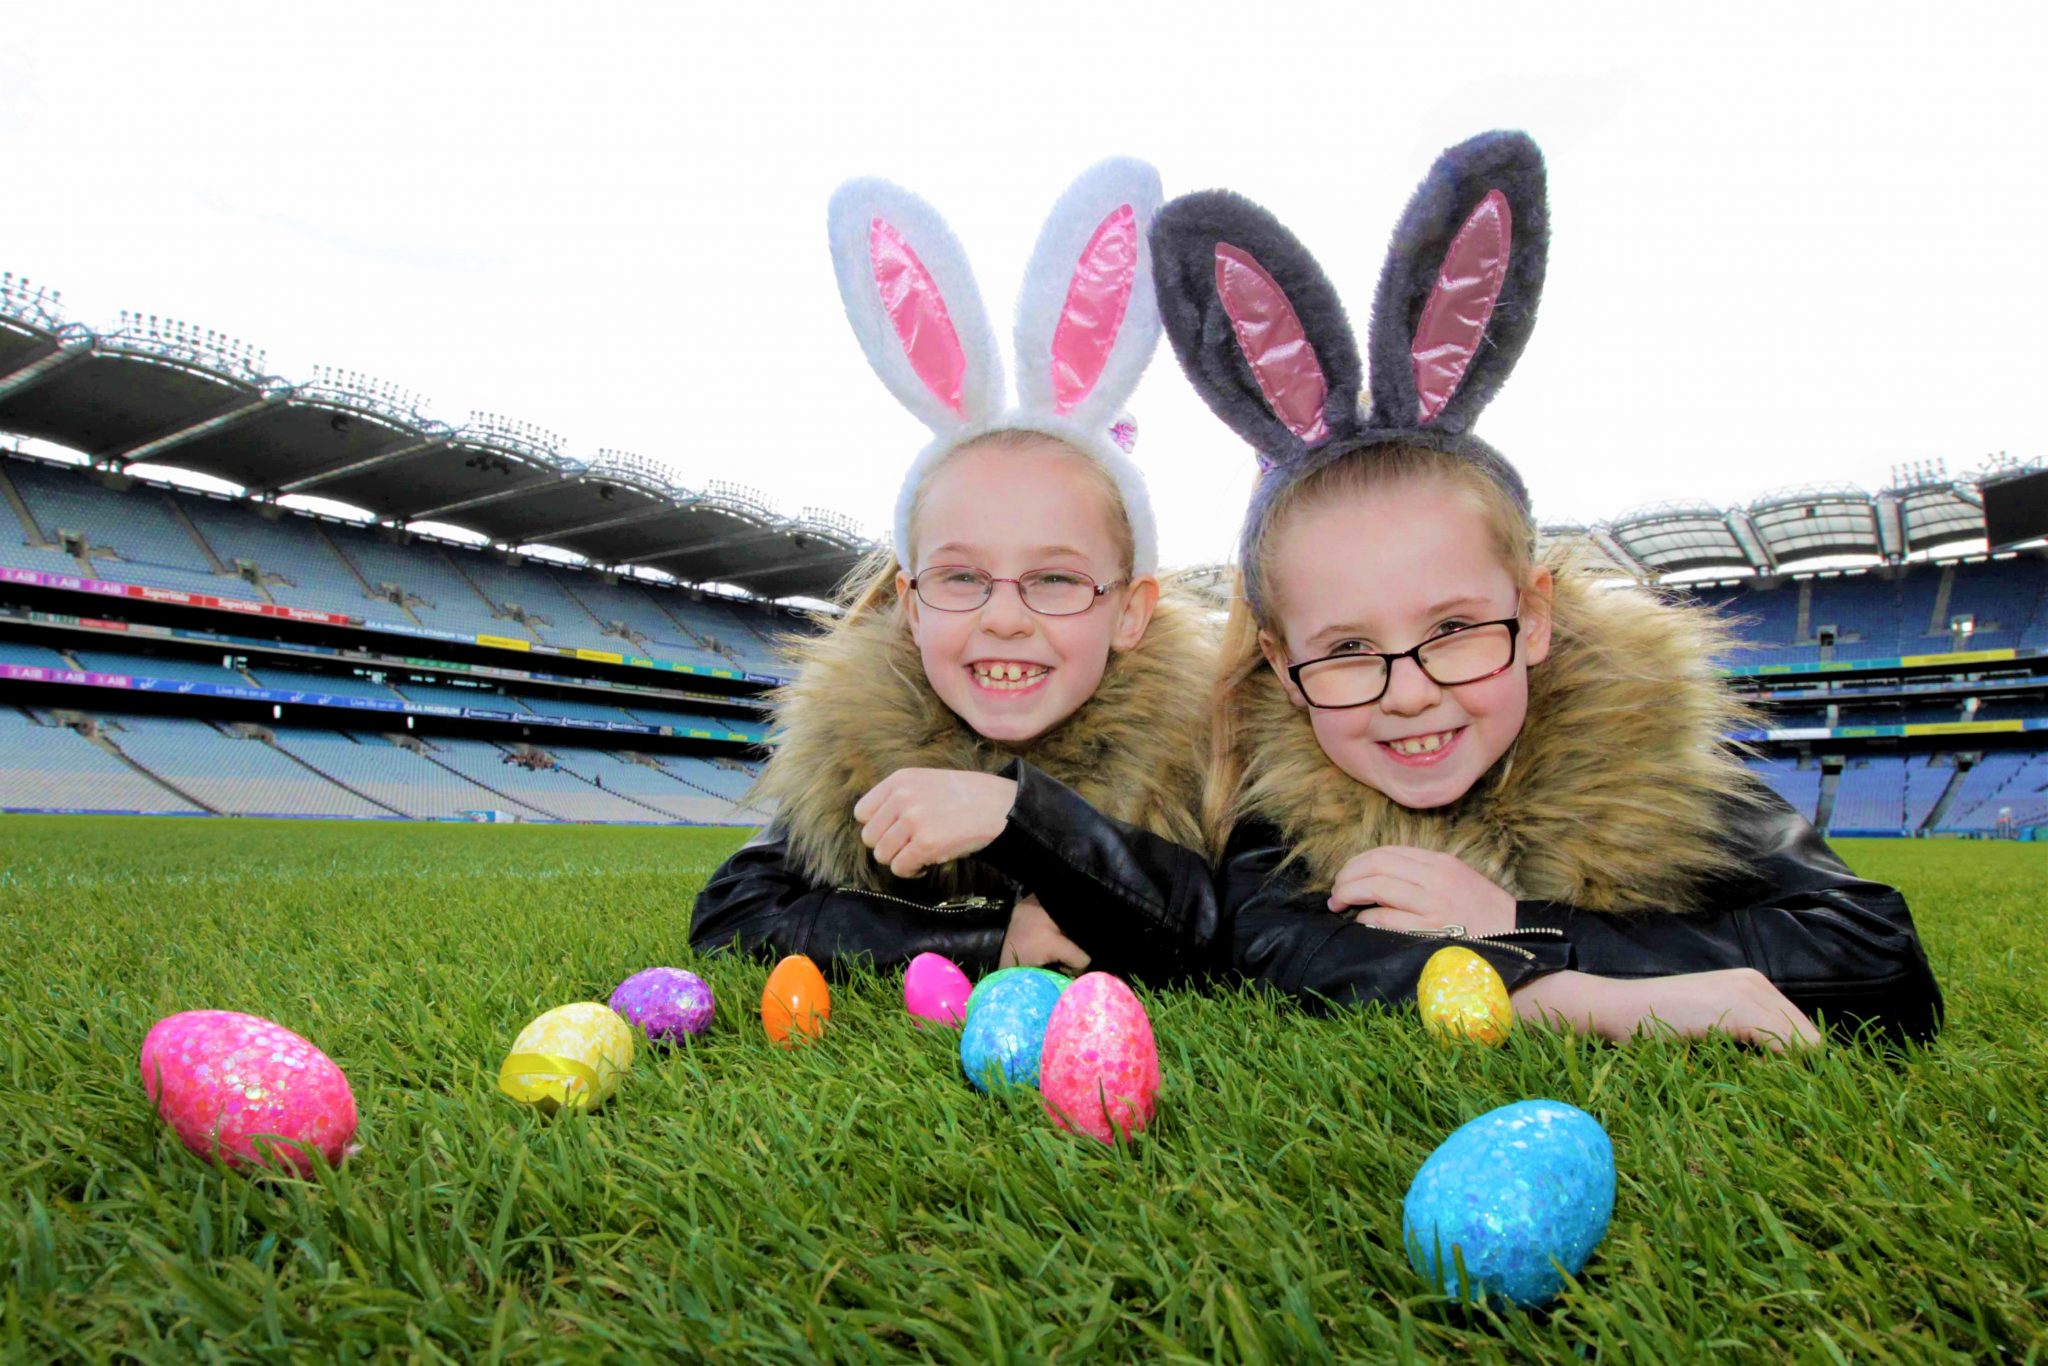 Baskets at the ready, Croke Park to host their annual egg hunt again this month